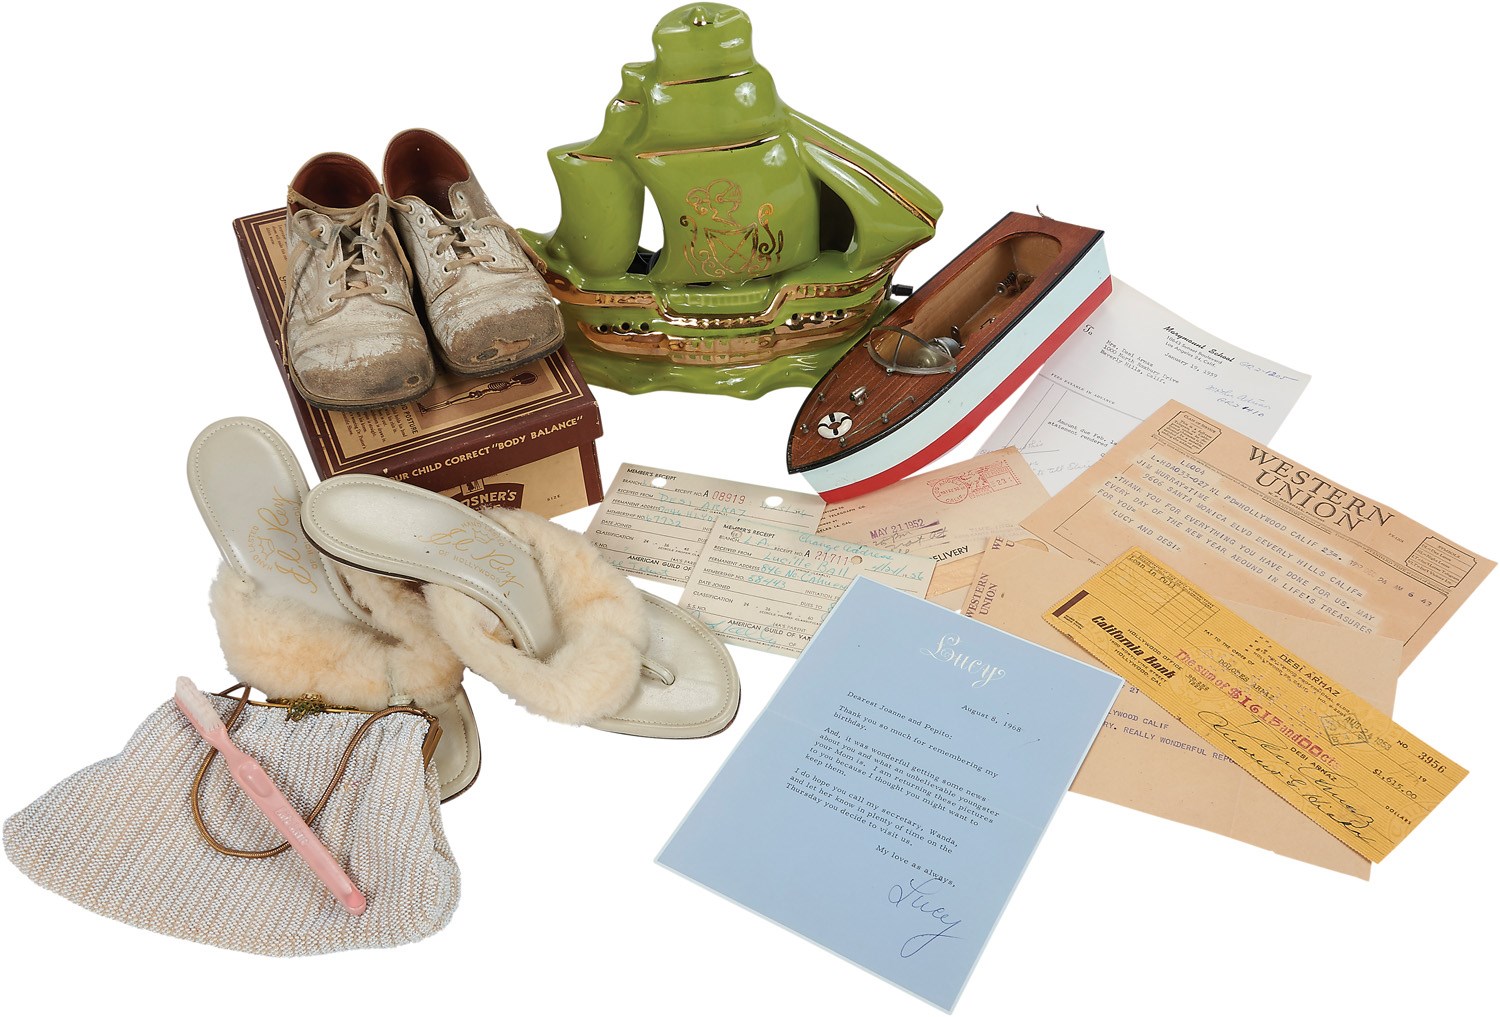 - "I Love Lucy" Collection with Lucy's High Heels, Show Props & Autographs (13)